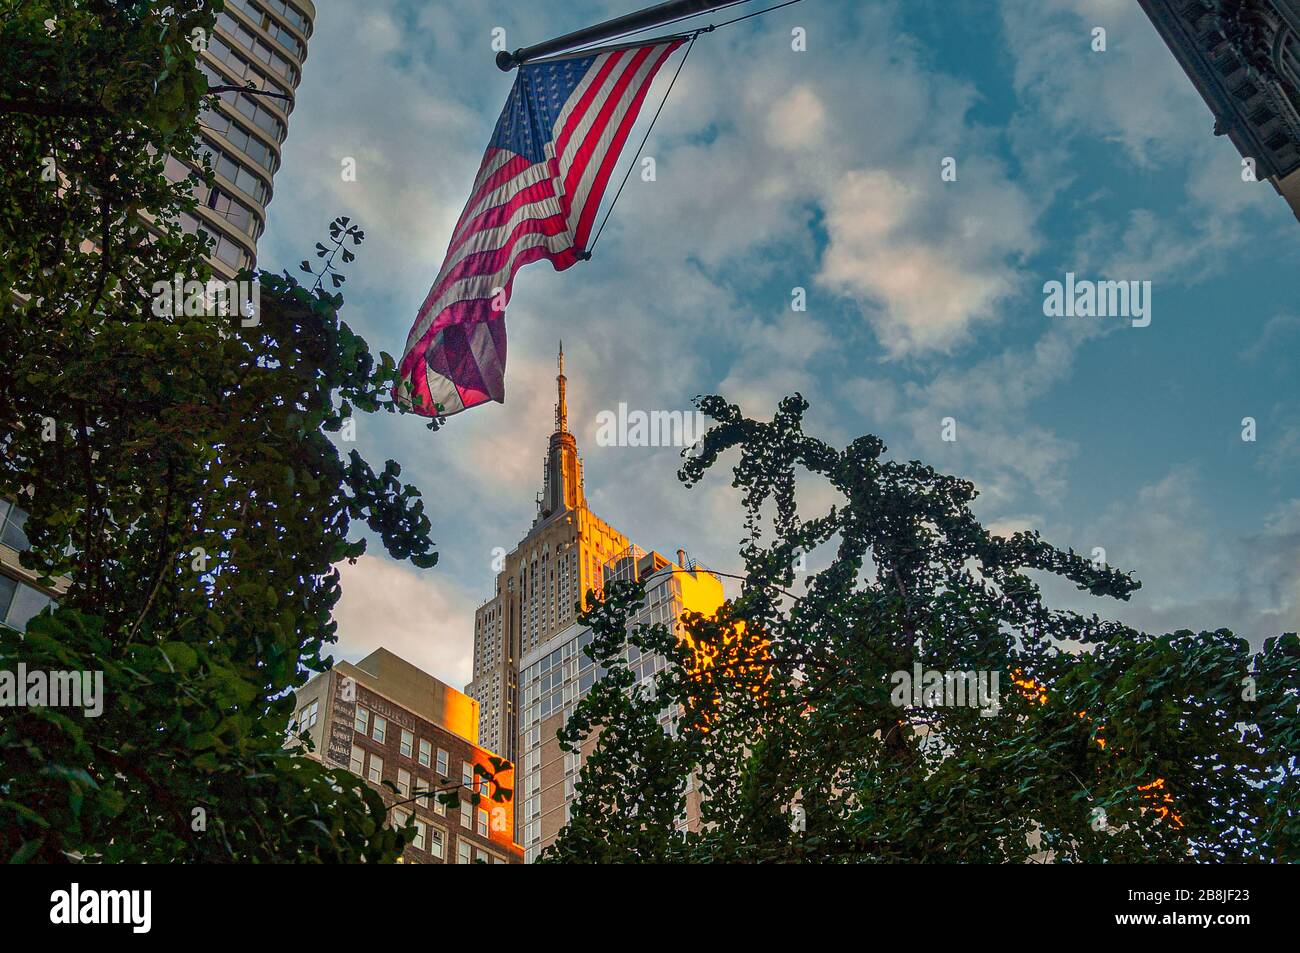 Low perspective view to the illuminated Empire State Building in New York and the hanging USA star spangled banner flag. Stock Photo